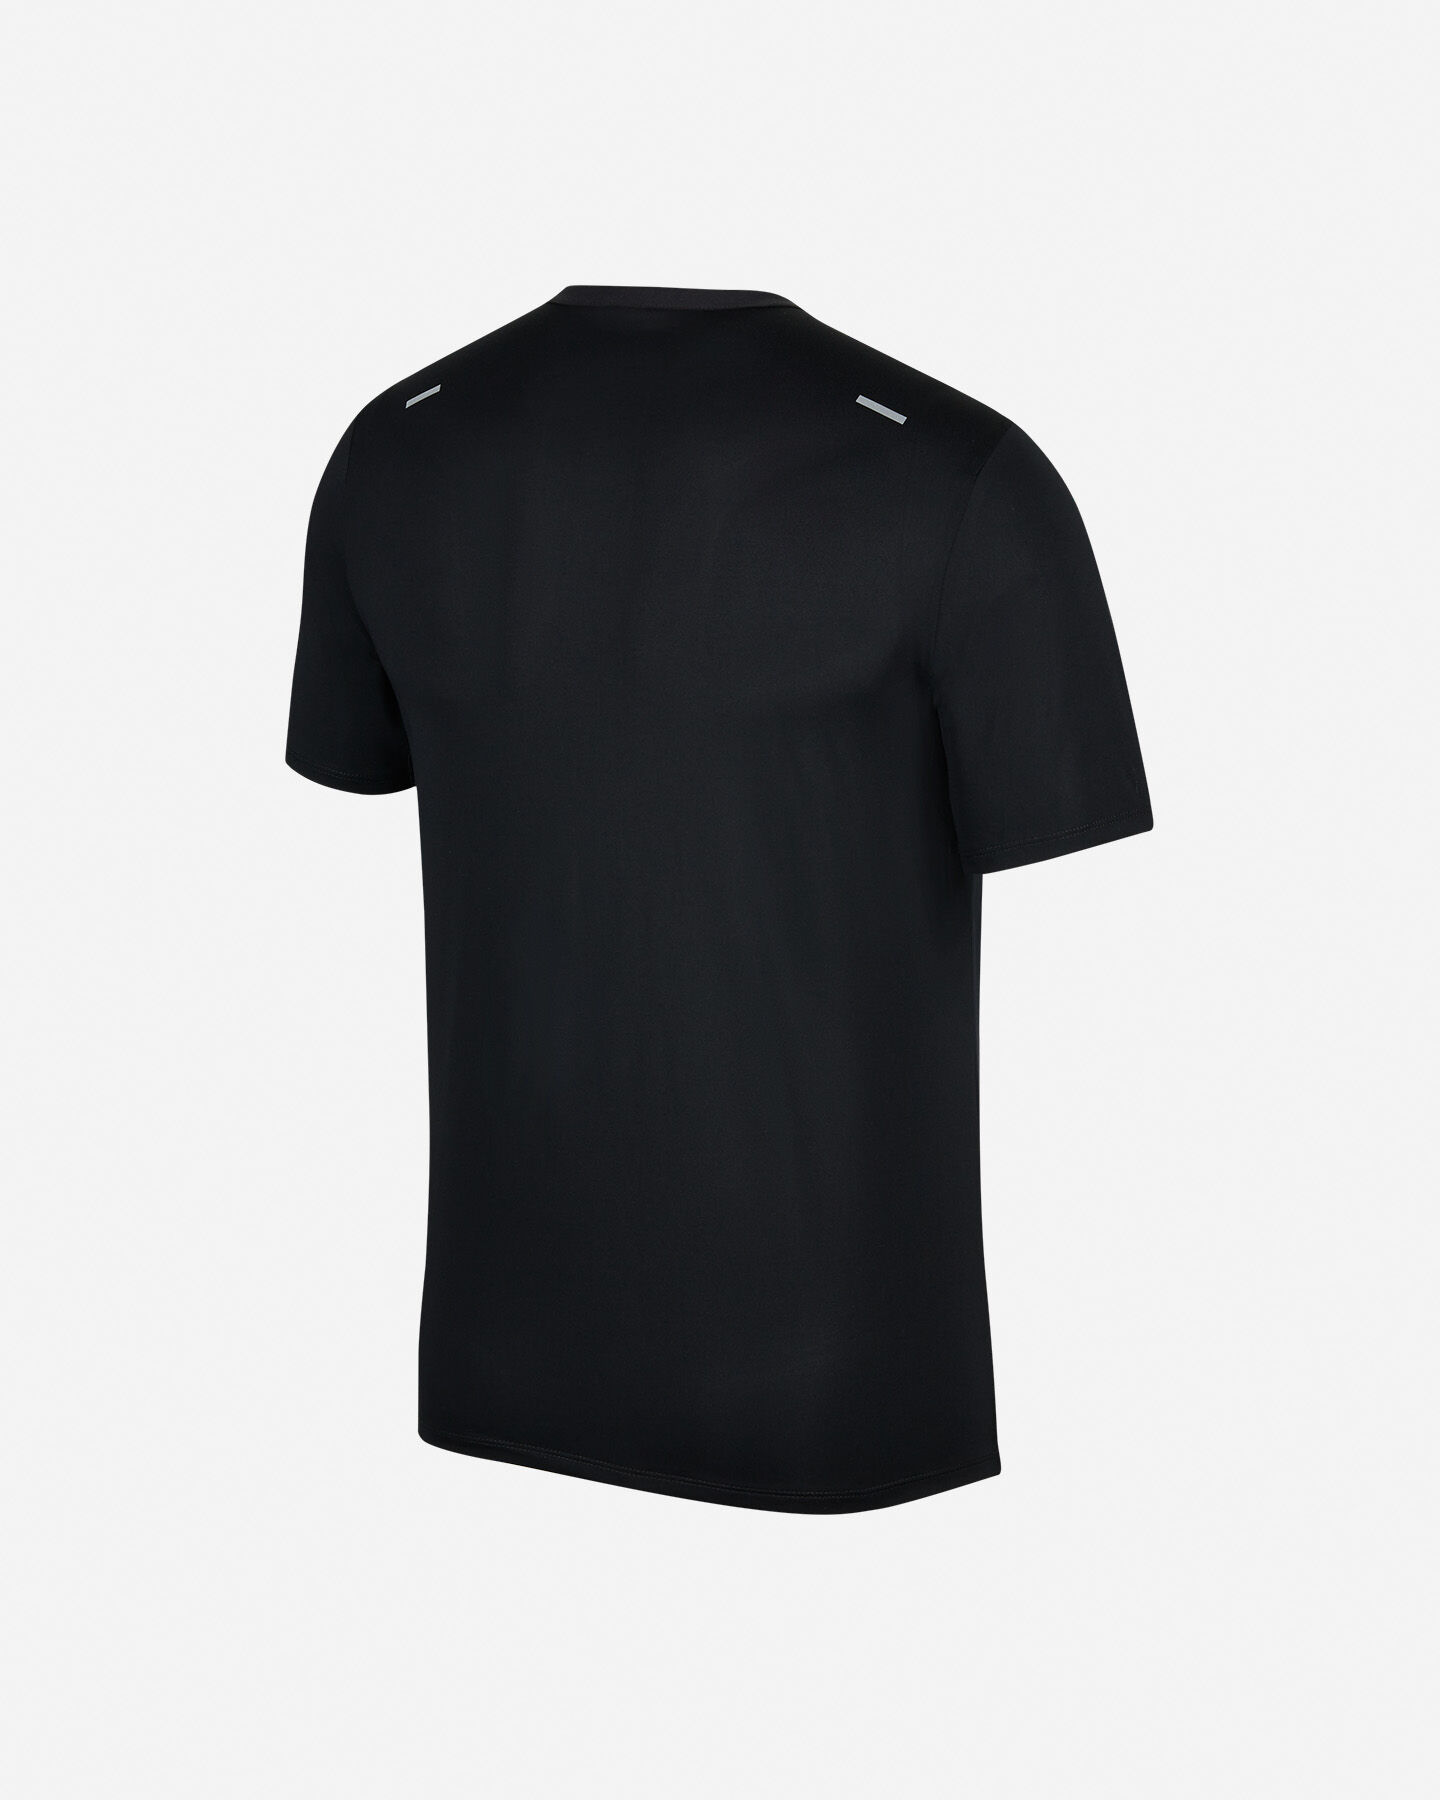  T-Shirt running NIKE RISE 365 M S5299231|013|S scatto 1